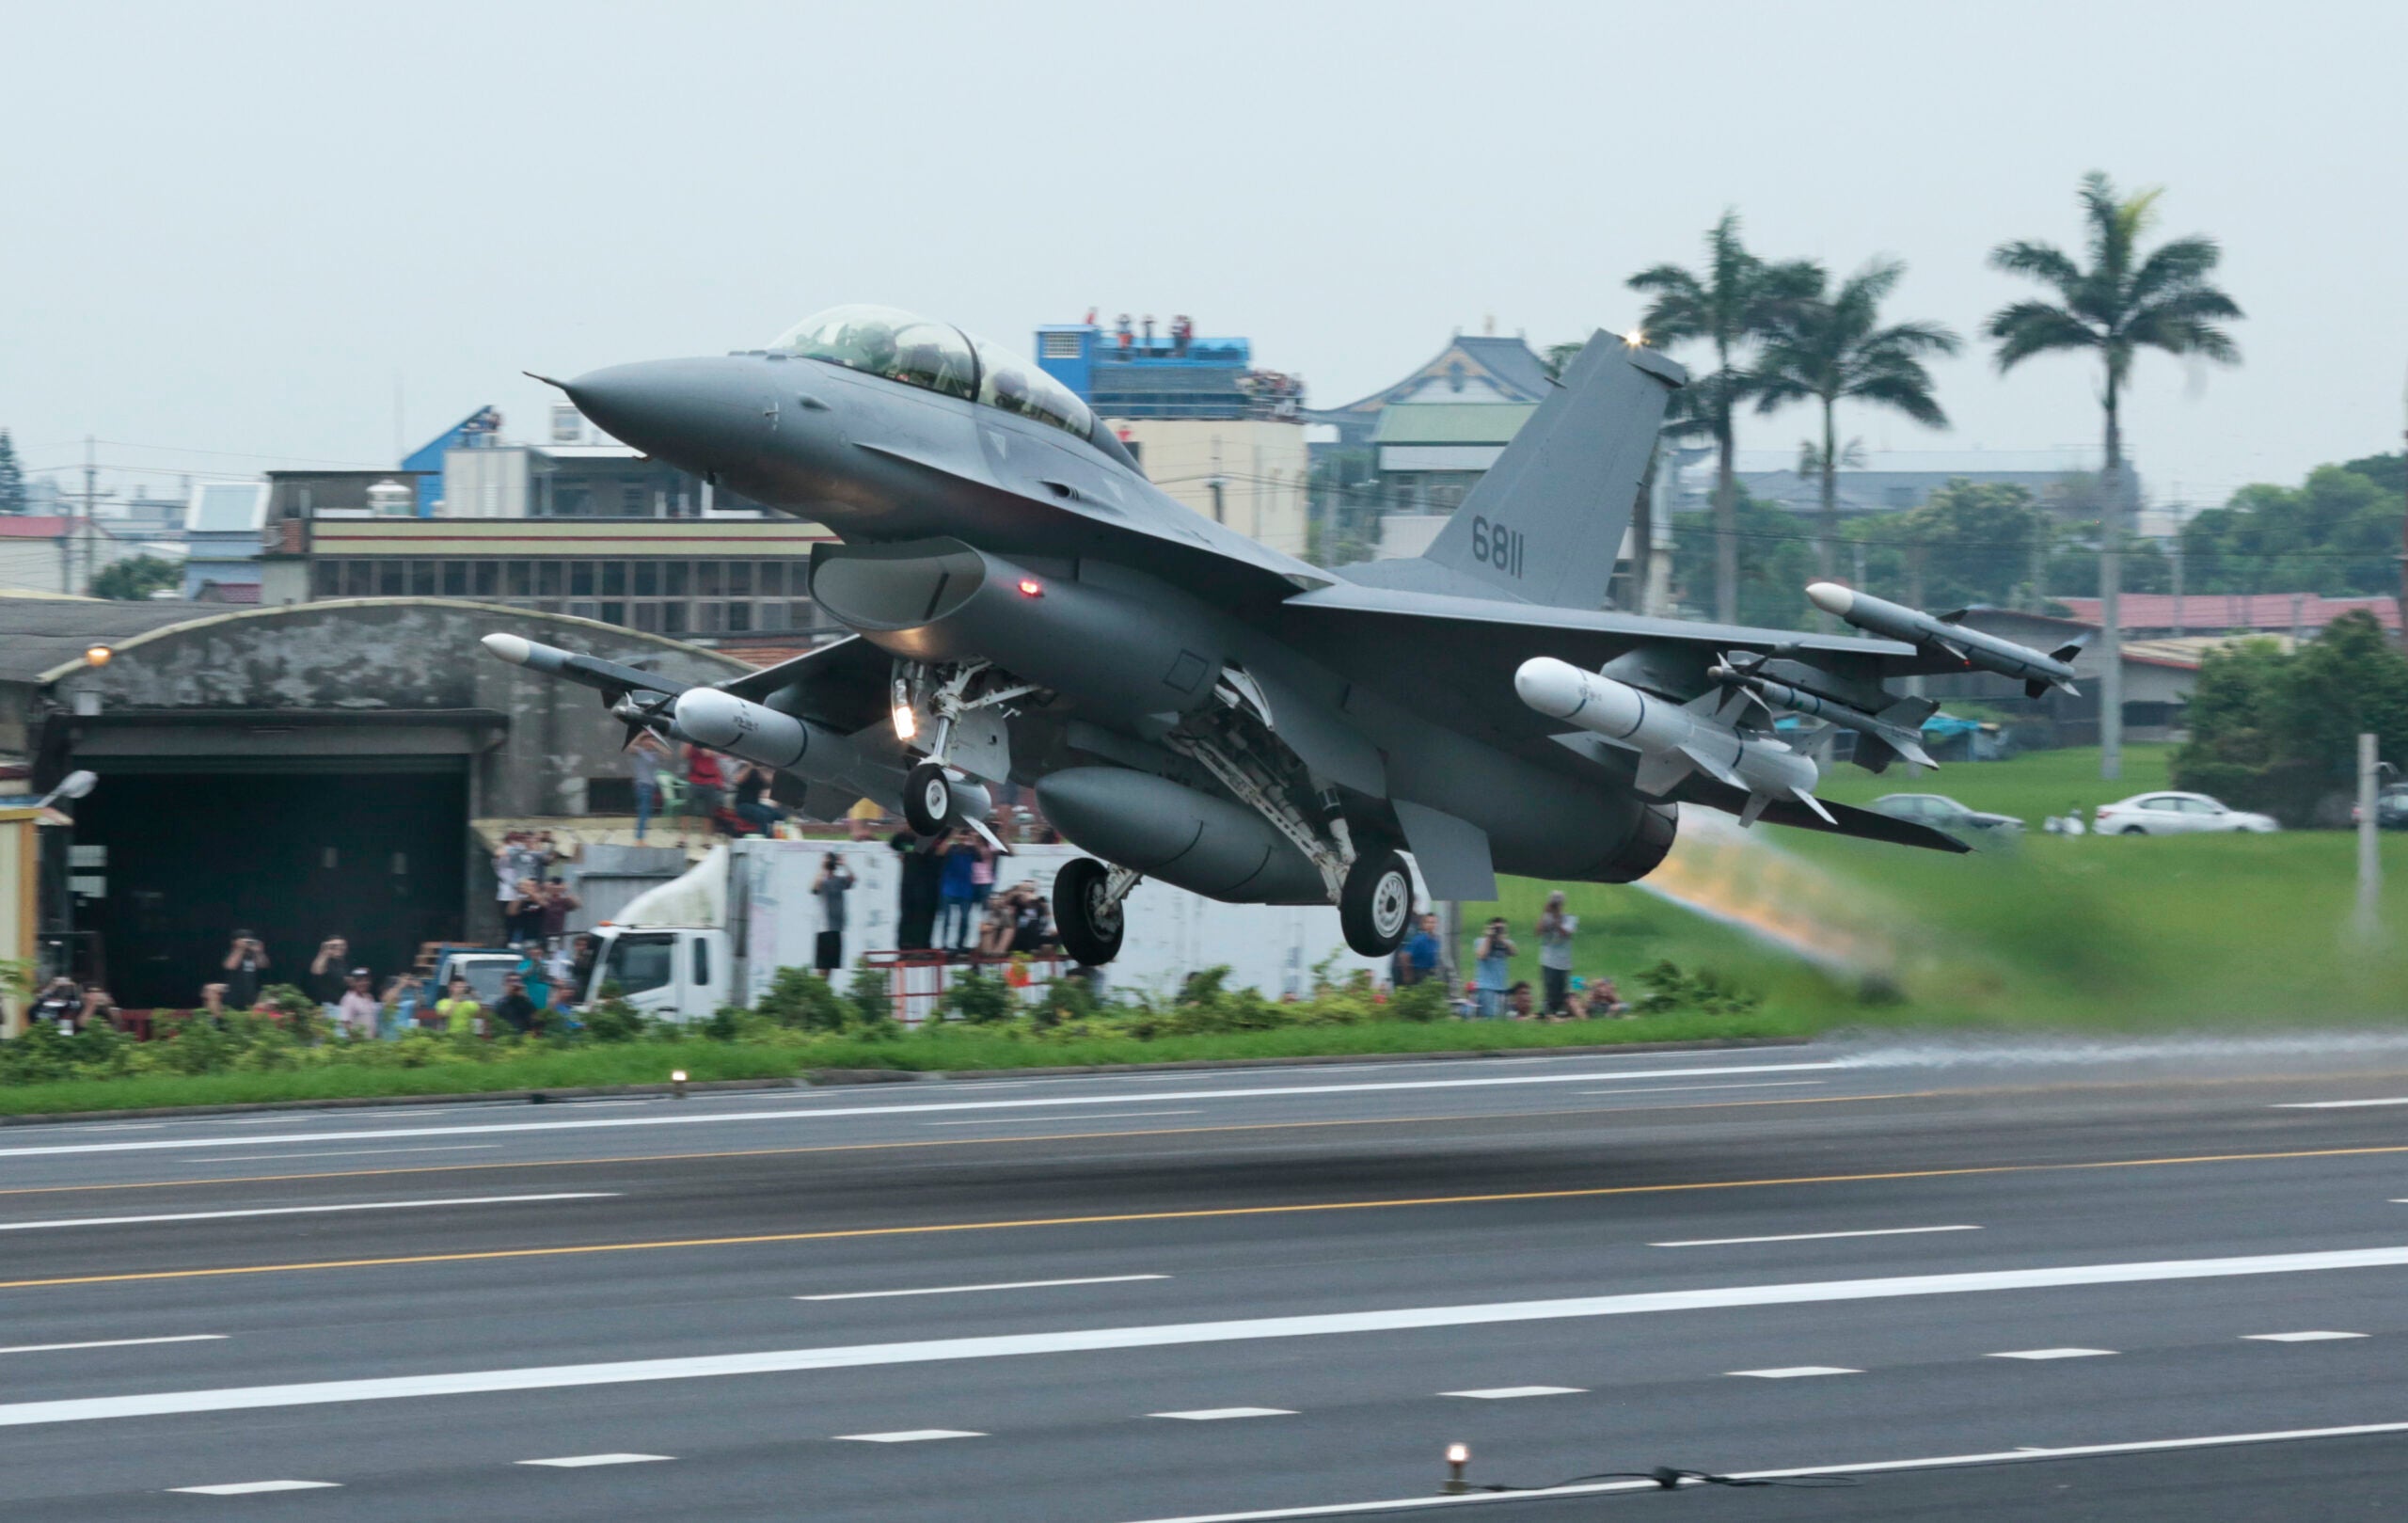 CHANG-HUA, TAIWAN - MAY 28: American F-16-V of Taiwan Air Force during a anti-invasion drill on hight-way road in Chang-Hua on May 28, 2019 in Chang-Hua, Taiwan. The live firing was part of annual exercices designed to prove the military's capabilities to repel any Chinese attack. China and Taiwan split during a civil war in 1949, but China claims Taiwan island as its territory. (Photo by Patrick Aventurier/Getty Images)